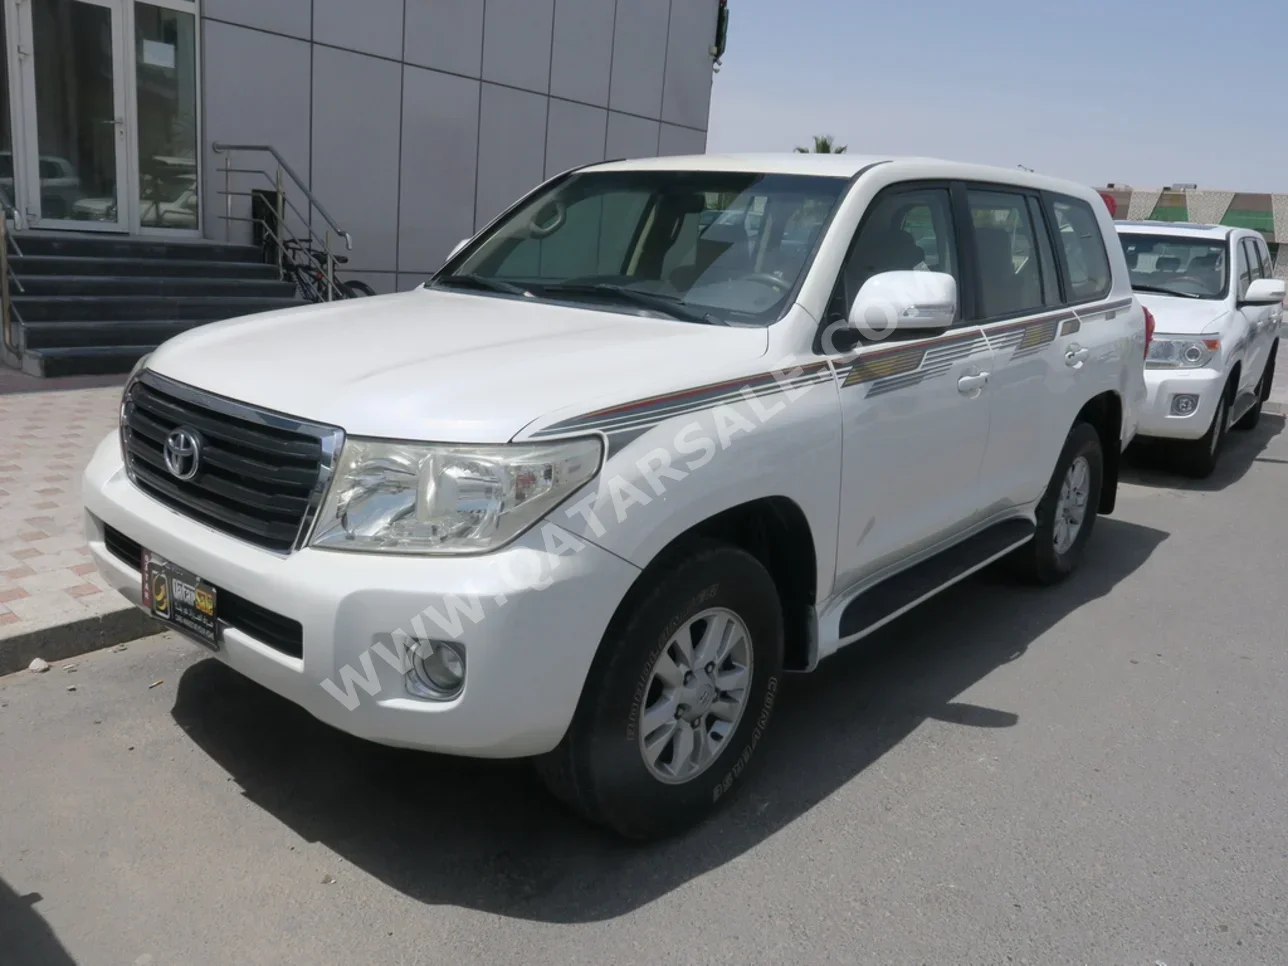 Toyota  Land Cruiser  G  2013  Automatic  301,000 Km  6 Cylinder  Four Wheel Drive (4WD)  SUV  White